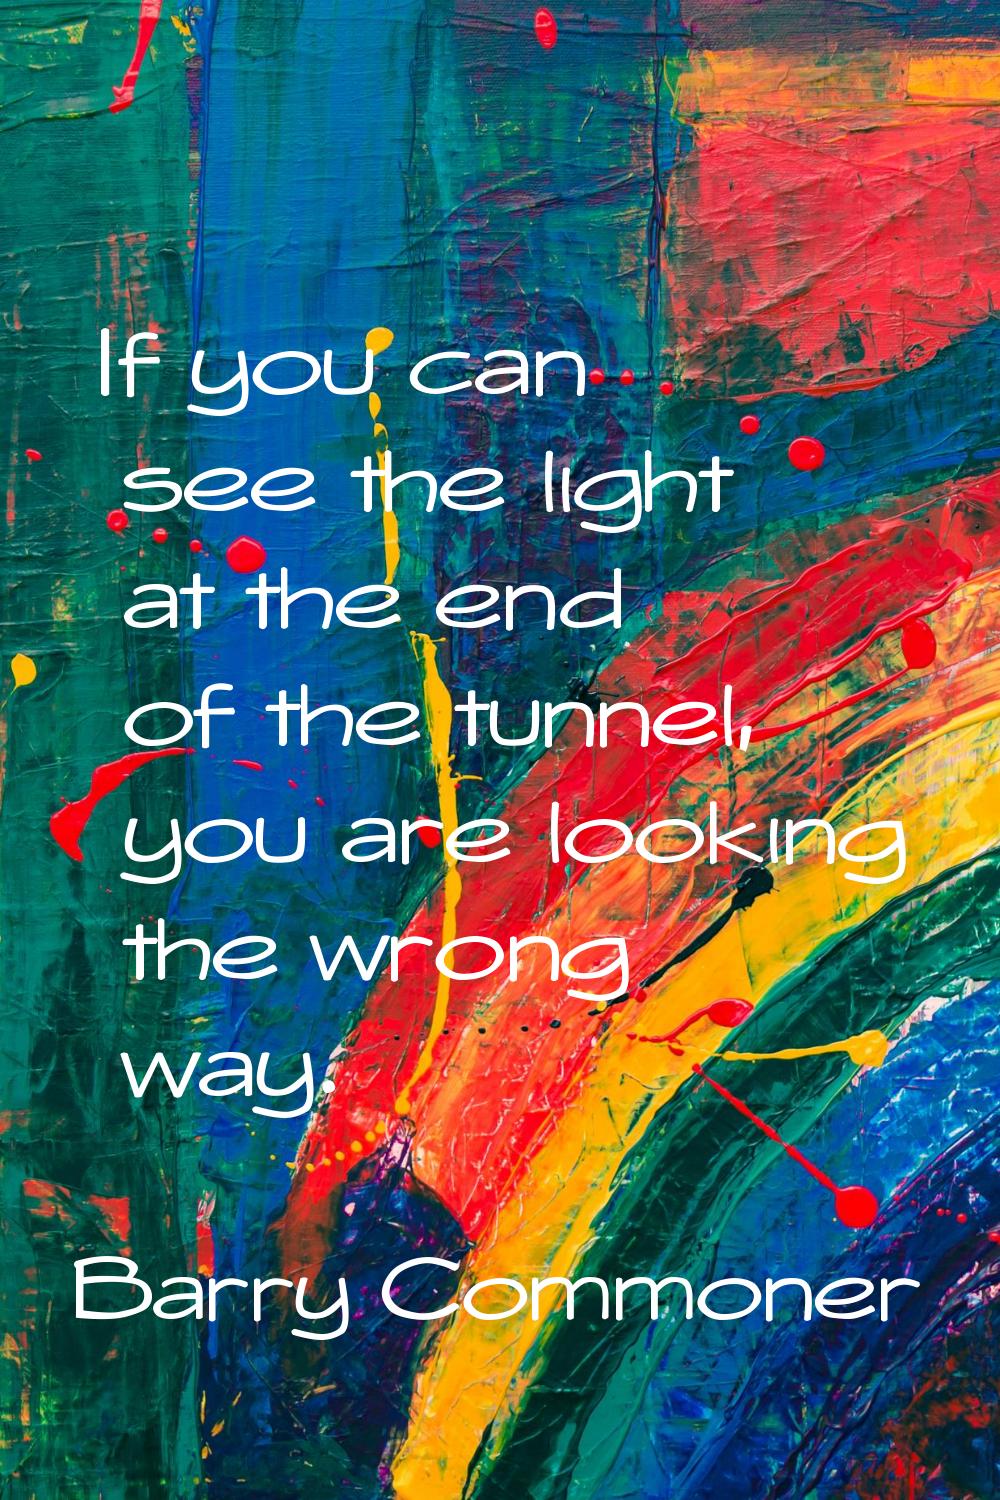 If you can see the light at the end of the tunnel, you are looking the wrong way.